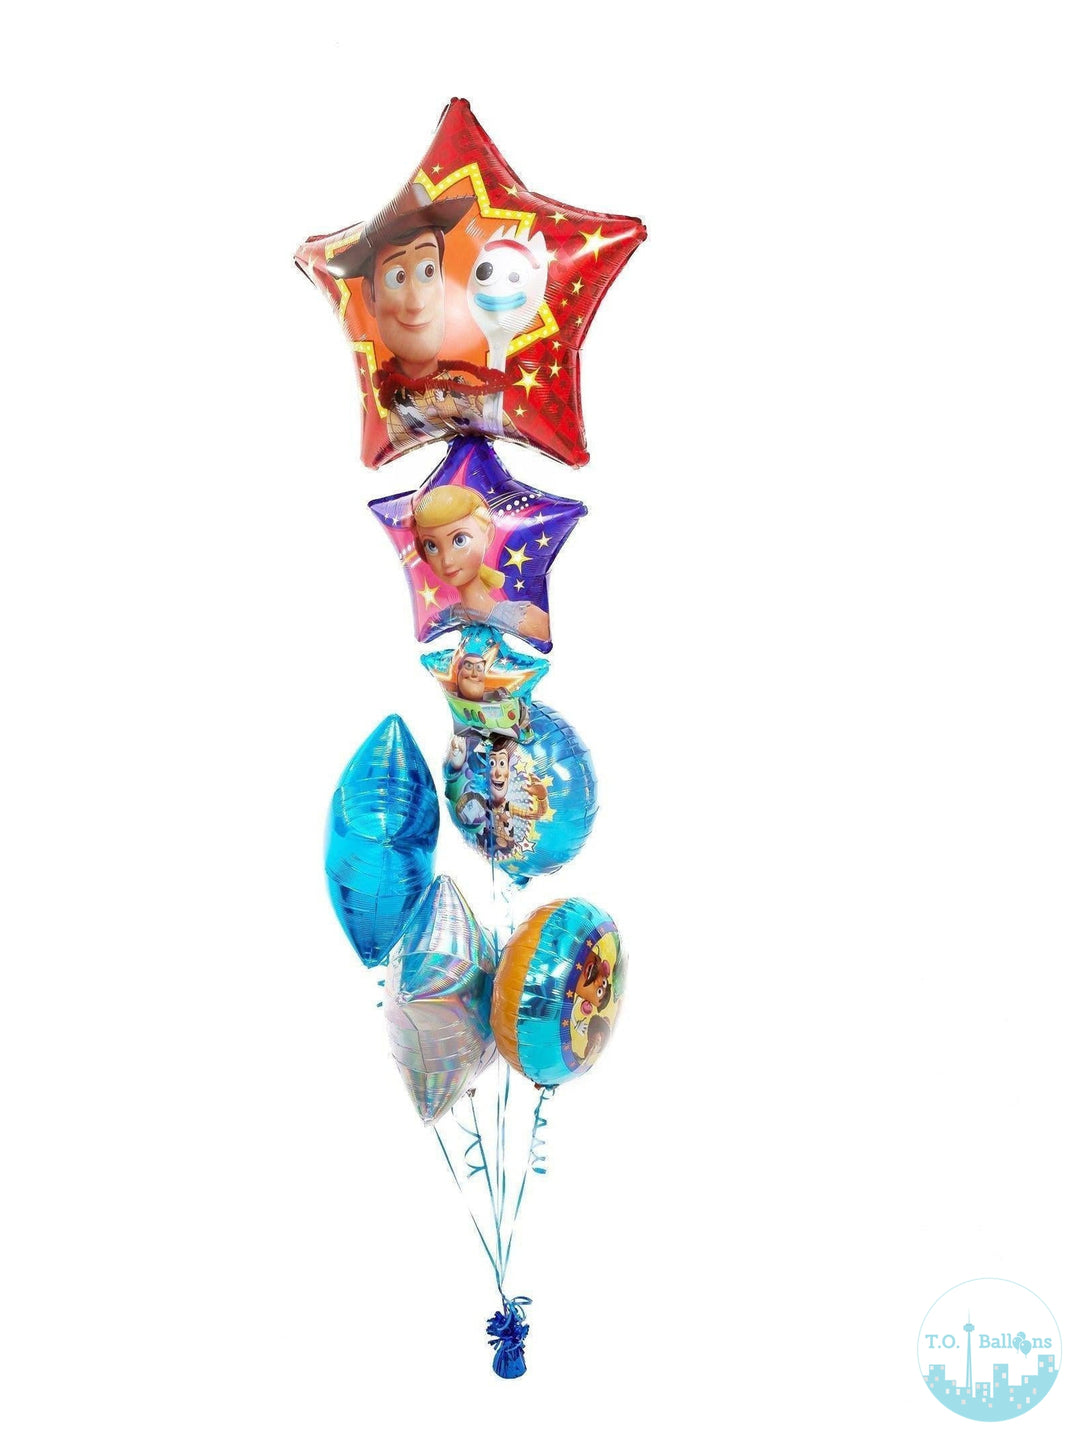 Toy Story balloons